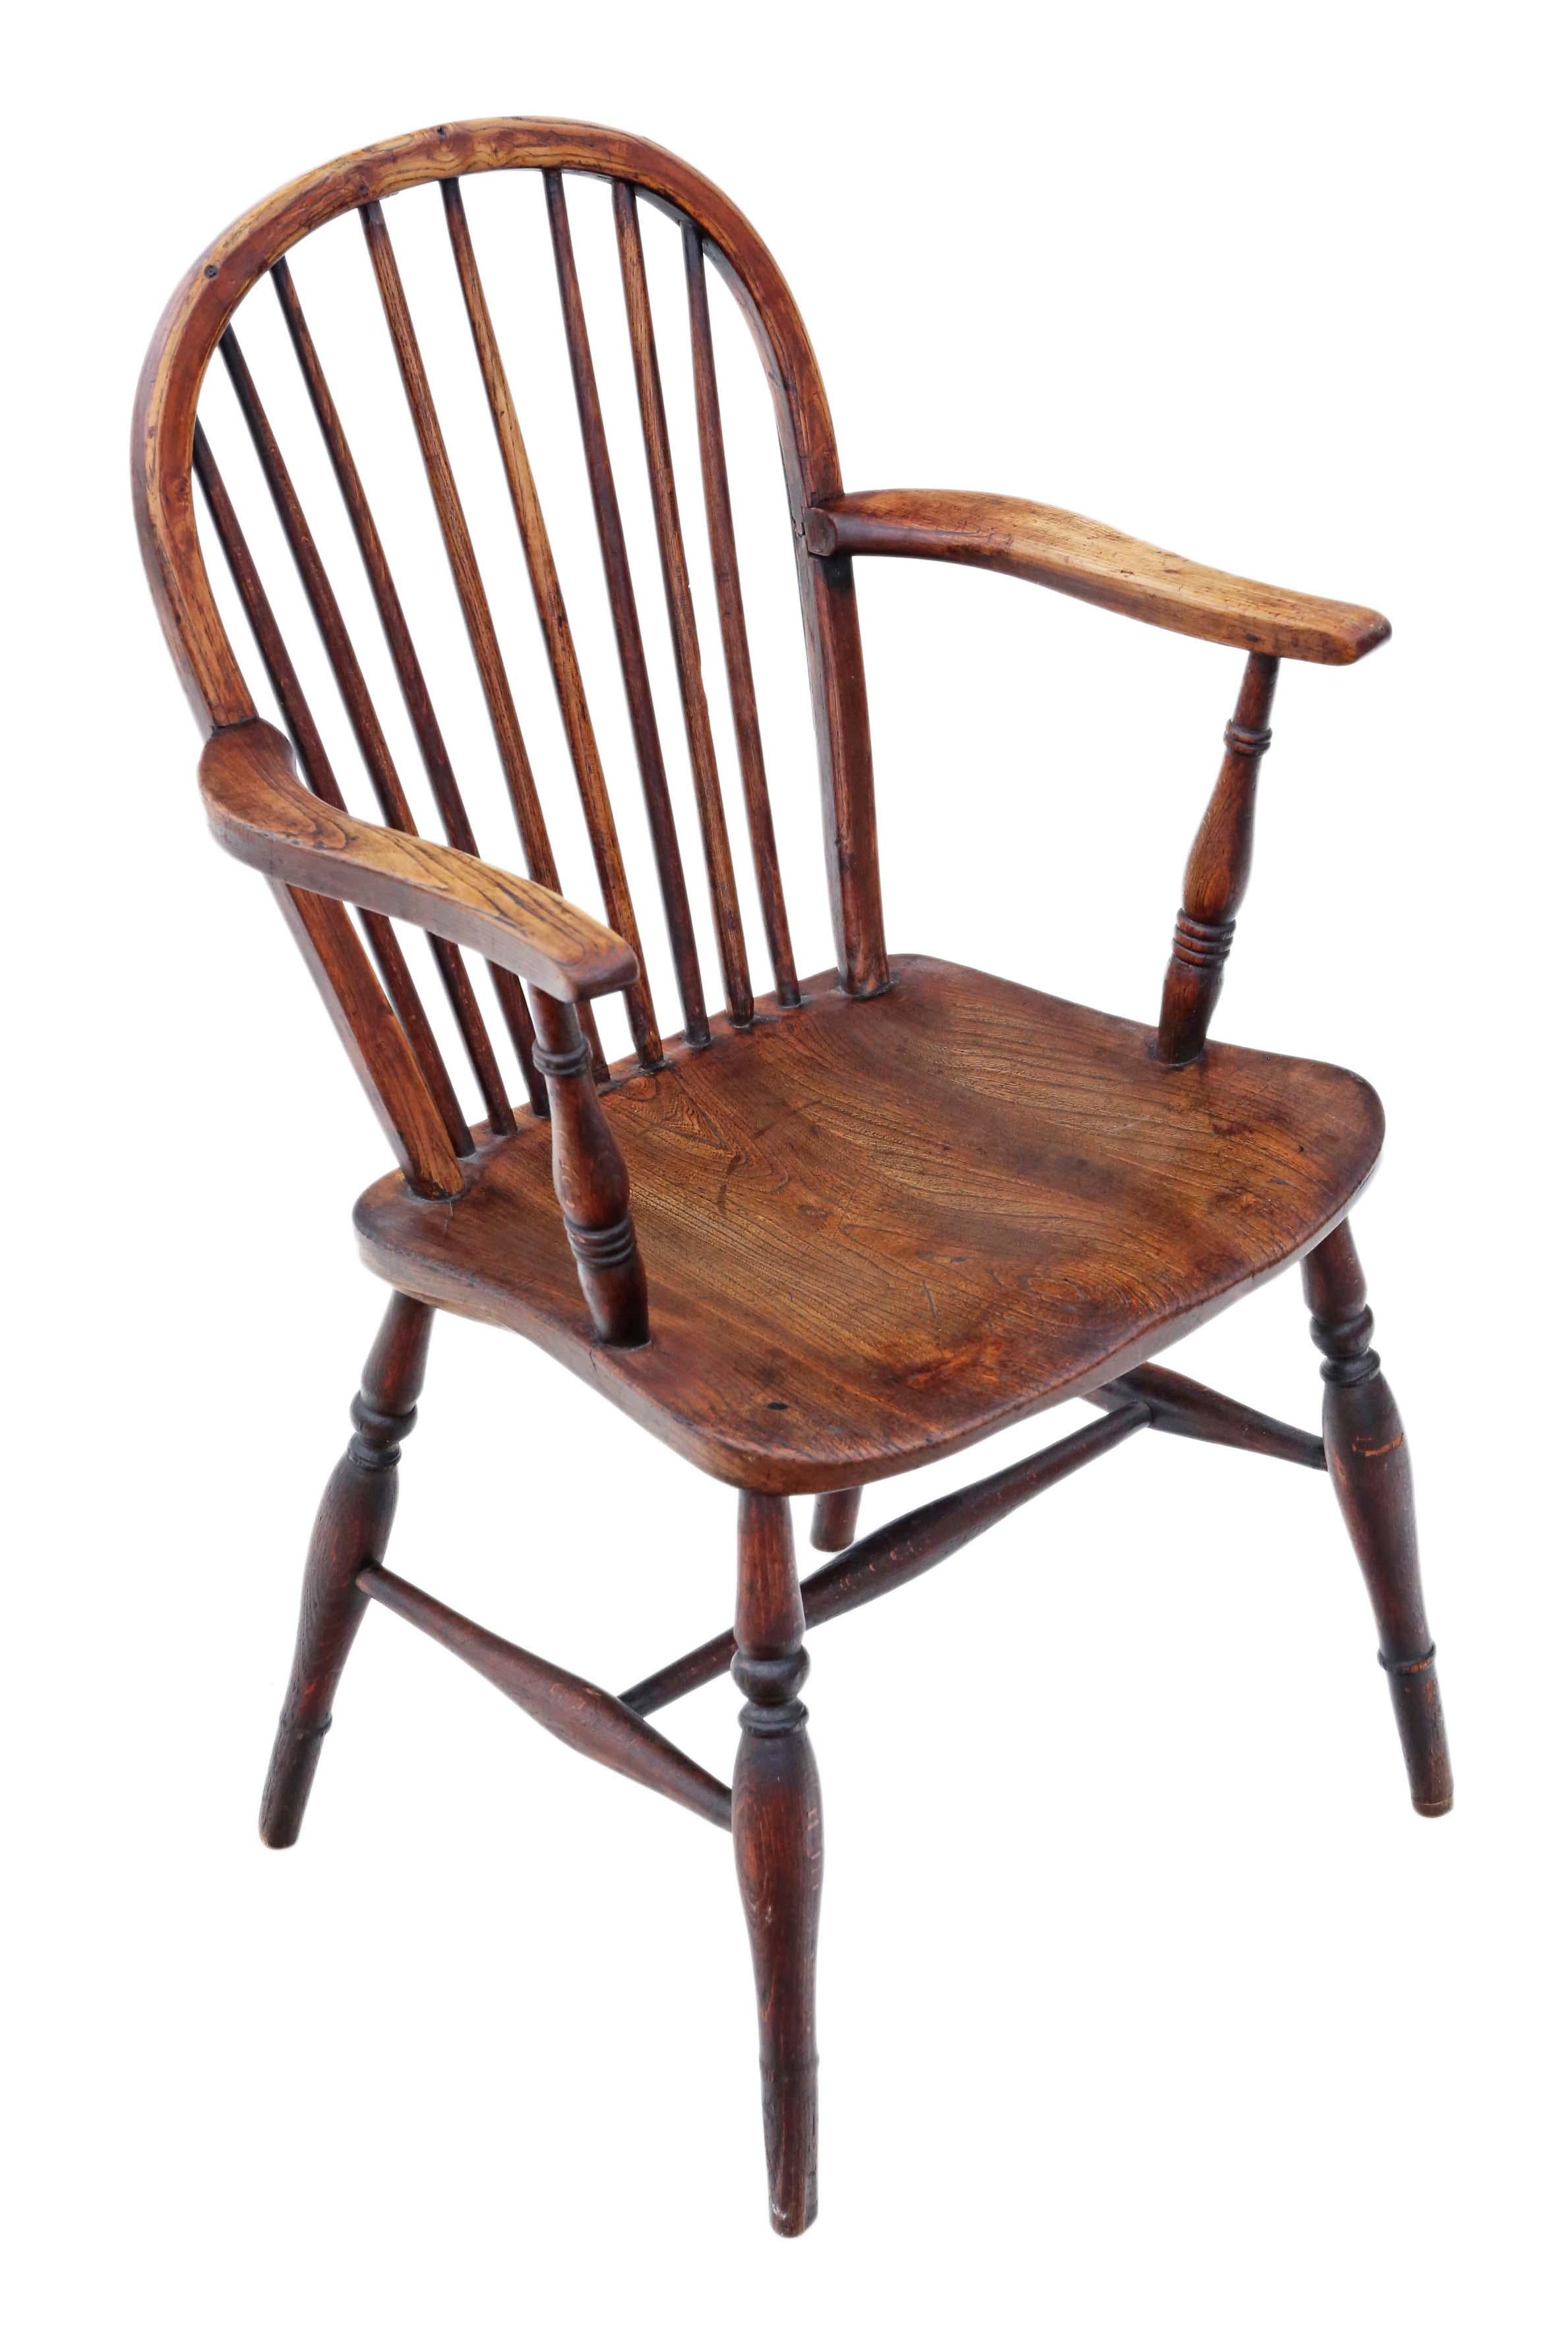 Antique Victorian 19th century mixed wood (ash, elm, yew and beech) Windsor chair dining armchair.
Solid and strong, with no loose joints and no woodworm. Full of age, character and charm. Very decorative chair with the best age and patina.
Would